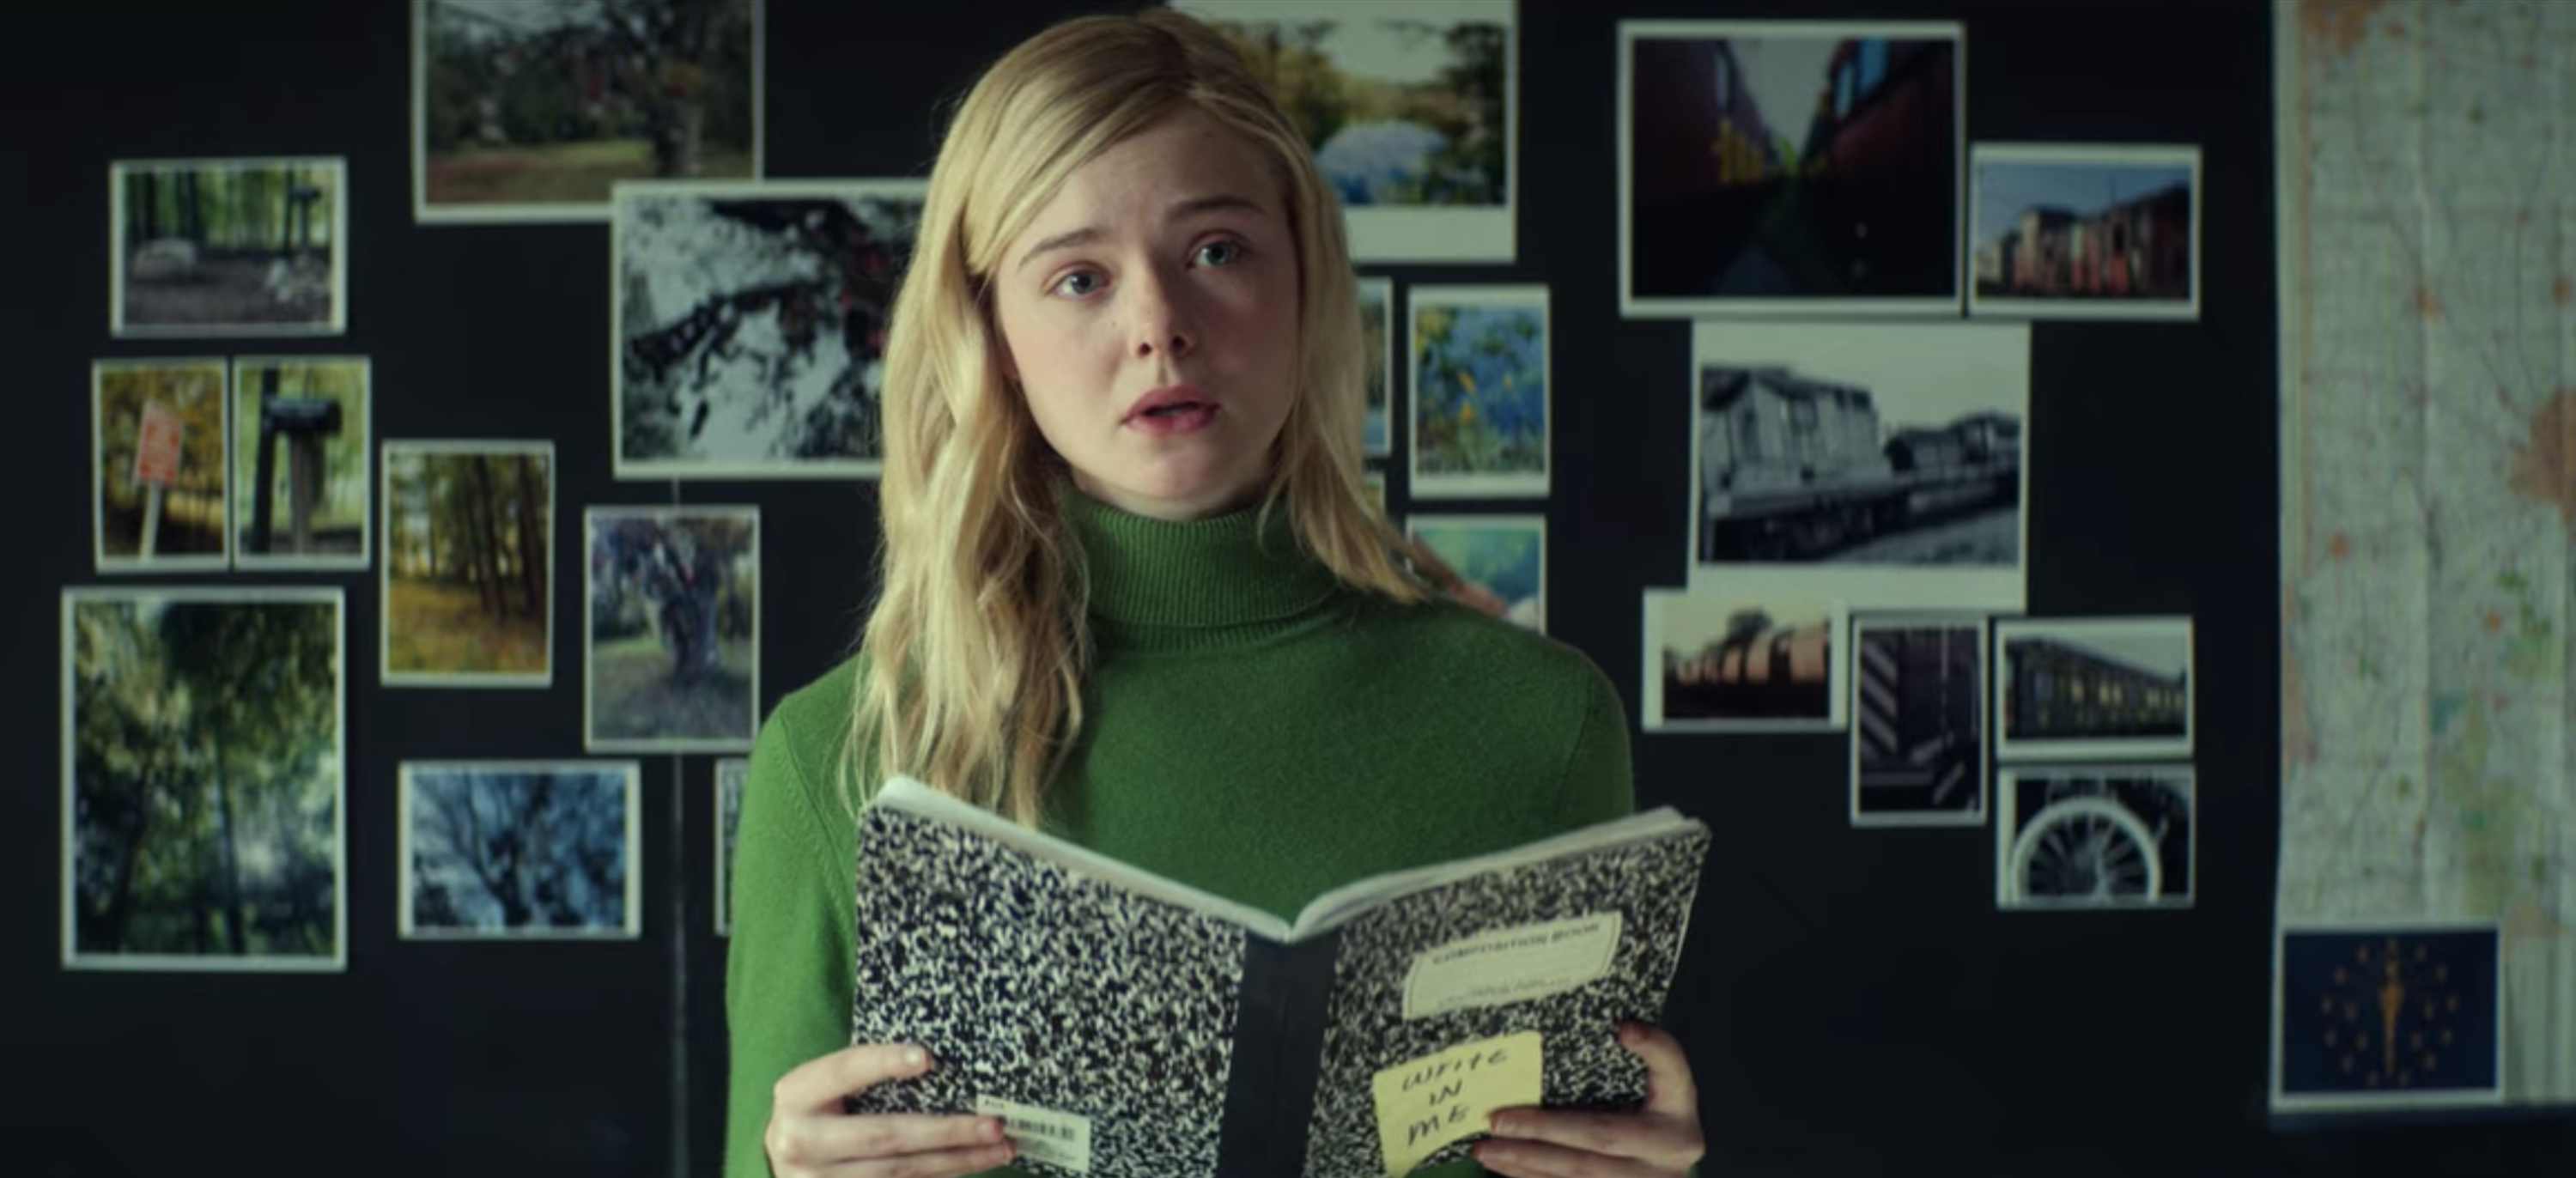 All The Bright Places" Book Details Make It Into The